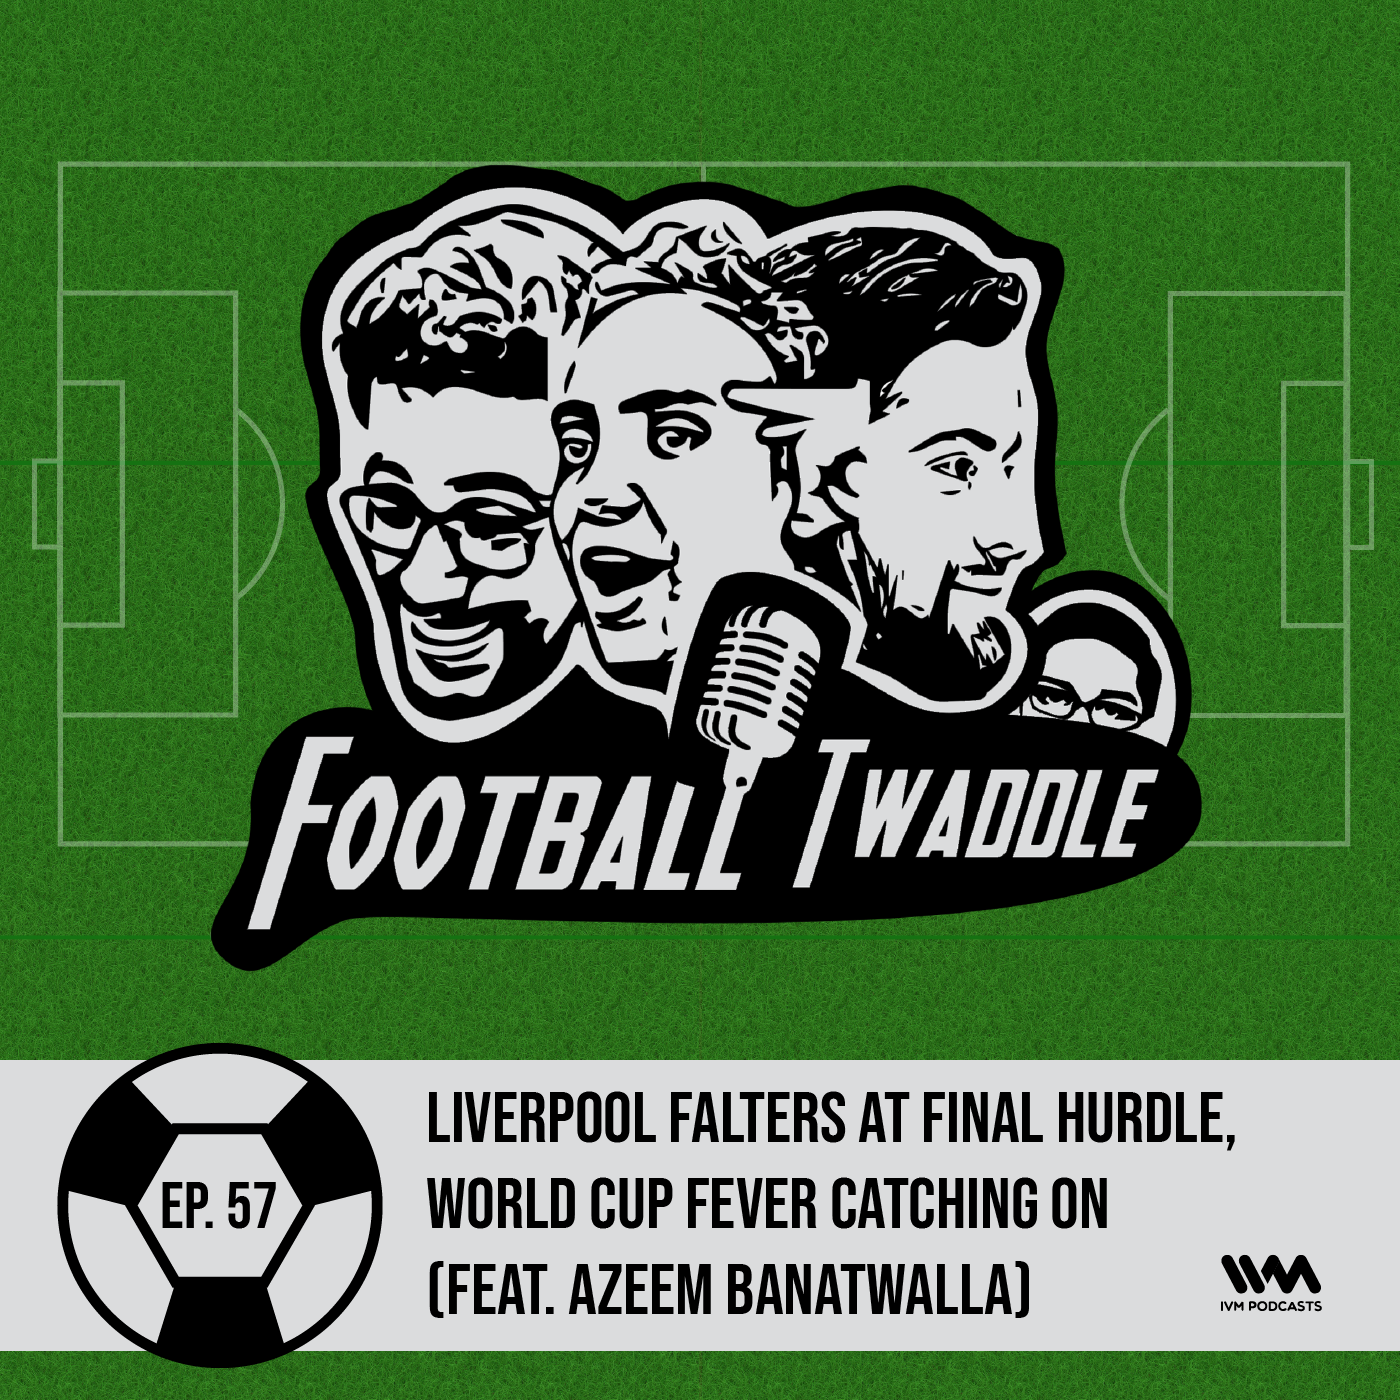 Liverpool Falters, World Cup Fever Catching On (ft. Azeem Banatwalla)